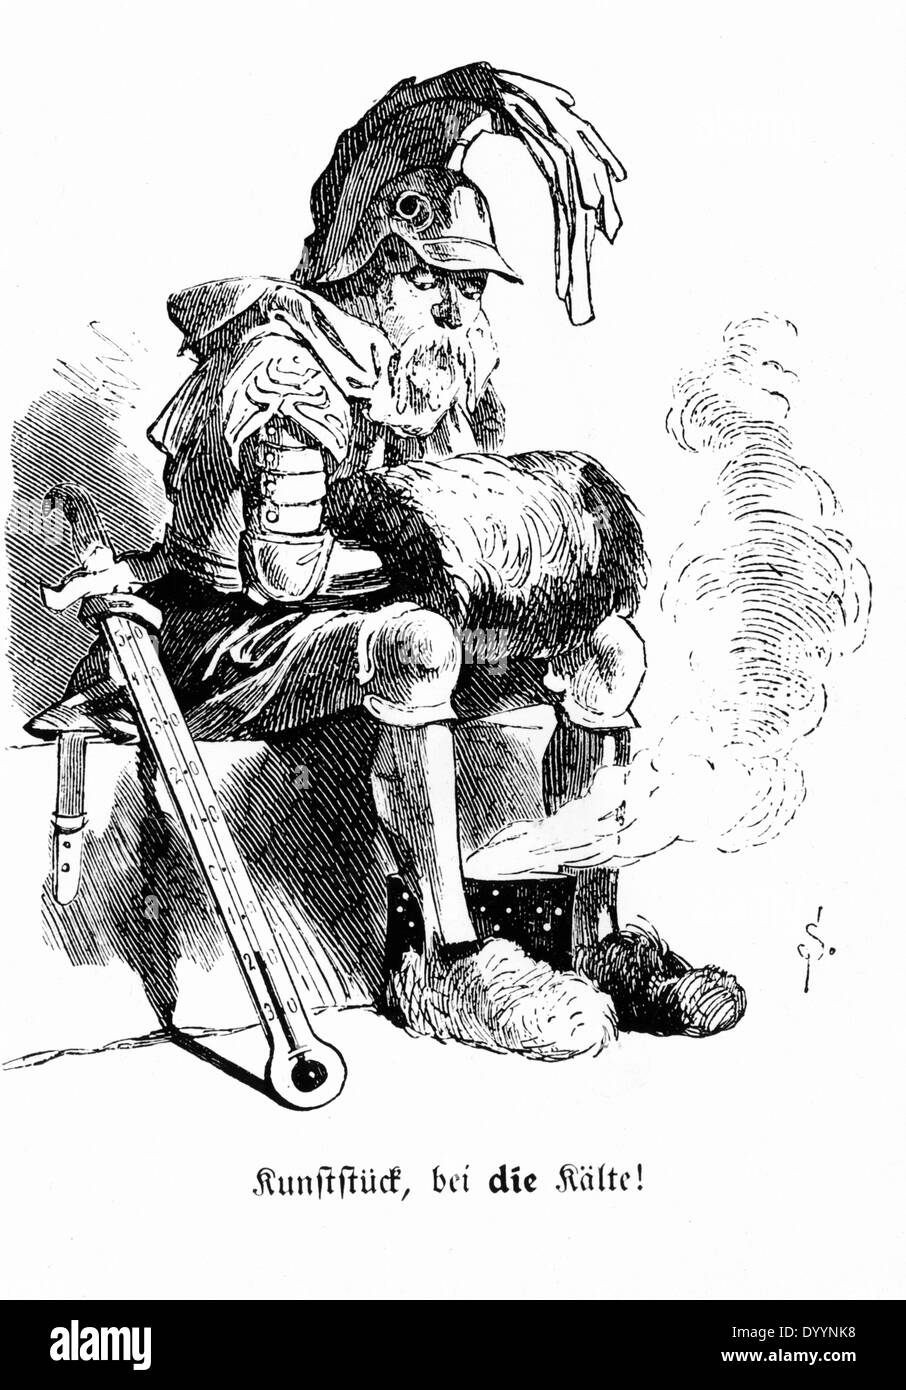 Caricature on war fatigue in the winter, 1870 Stock Photo